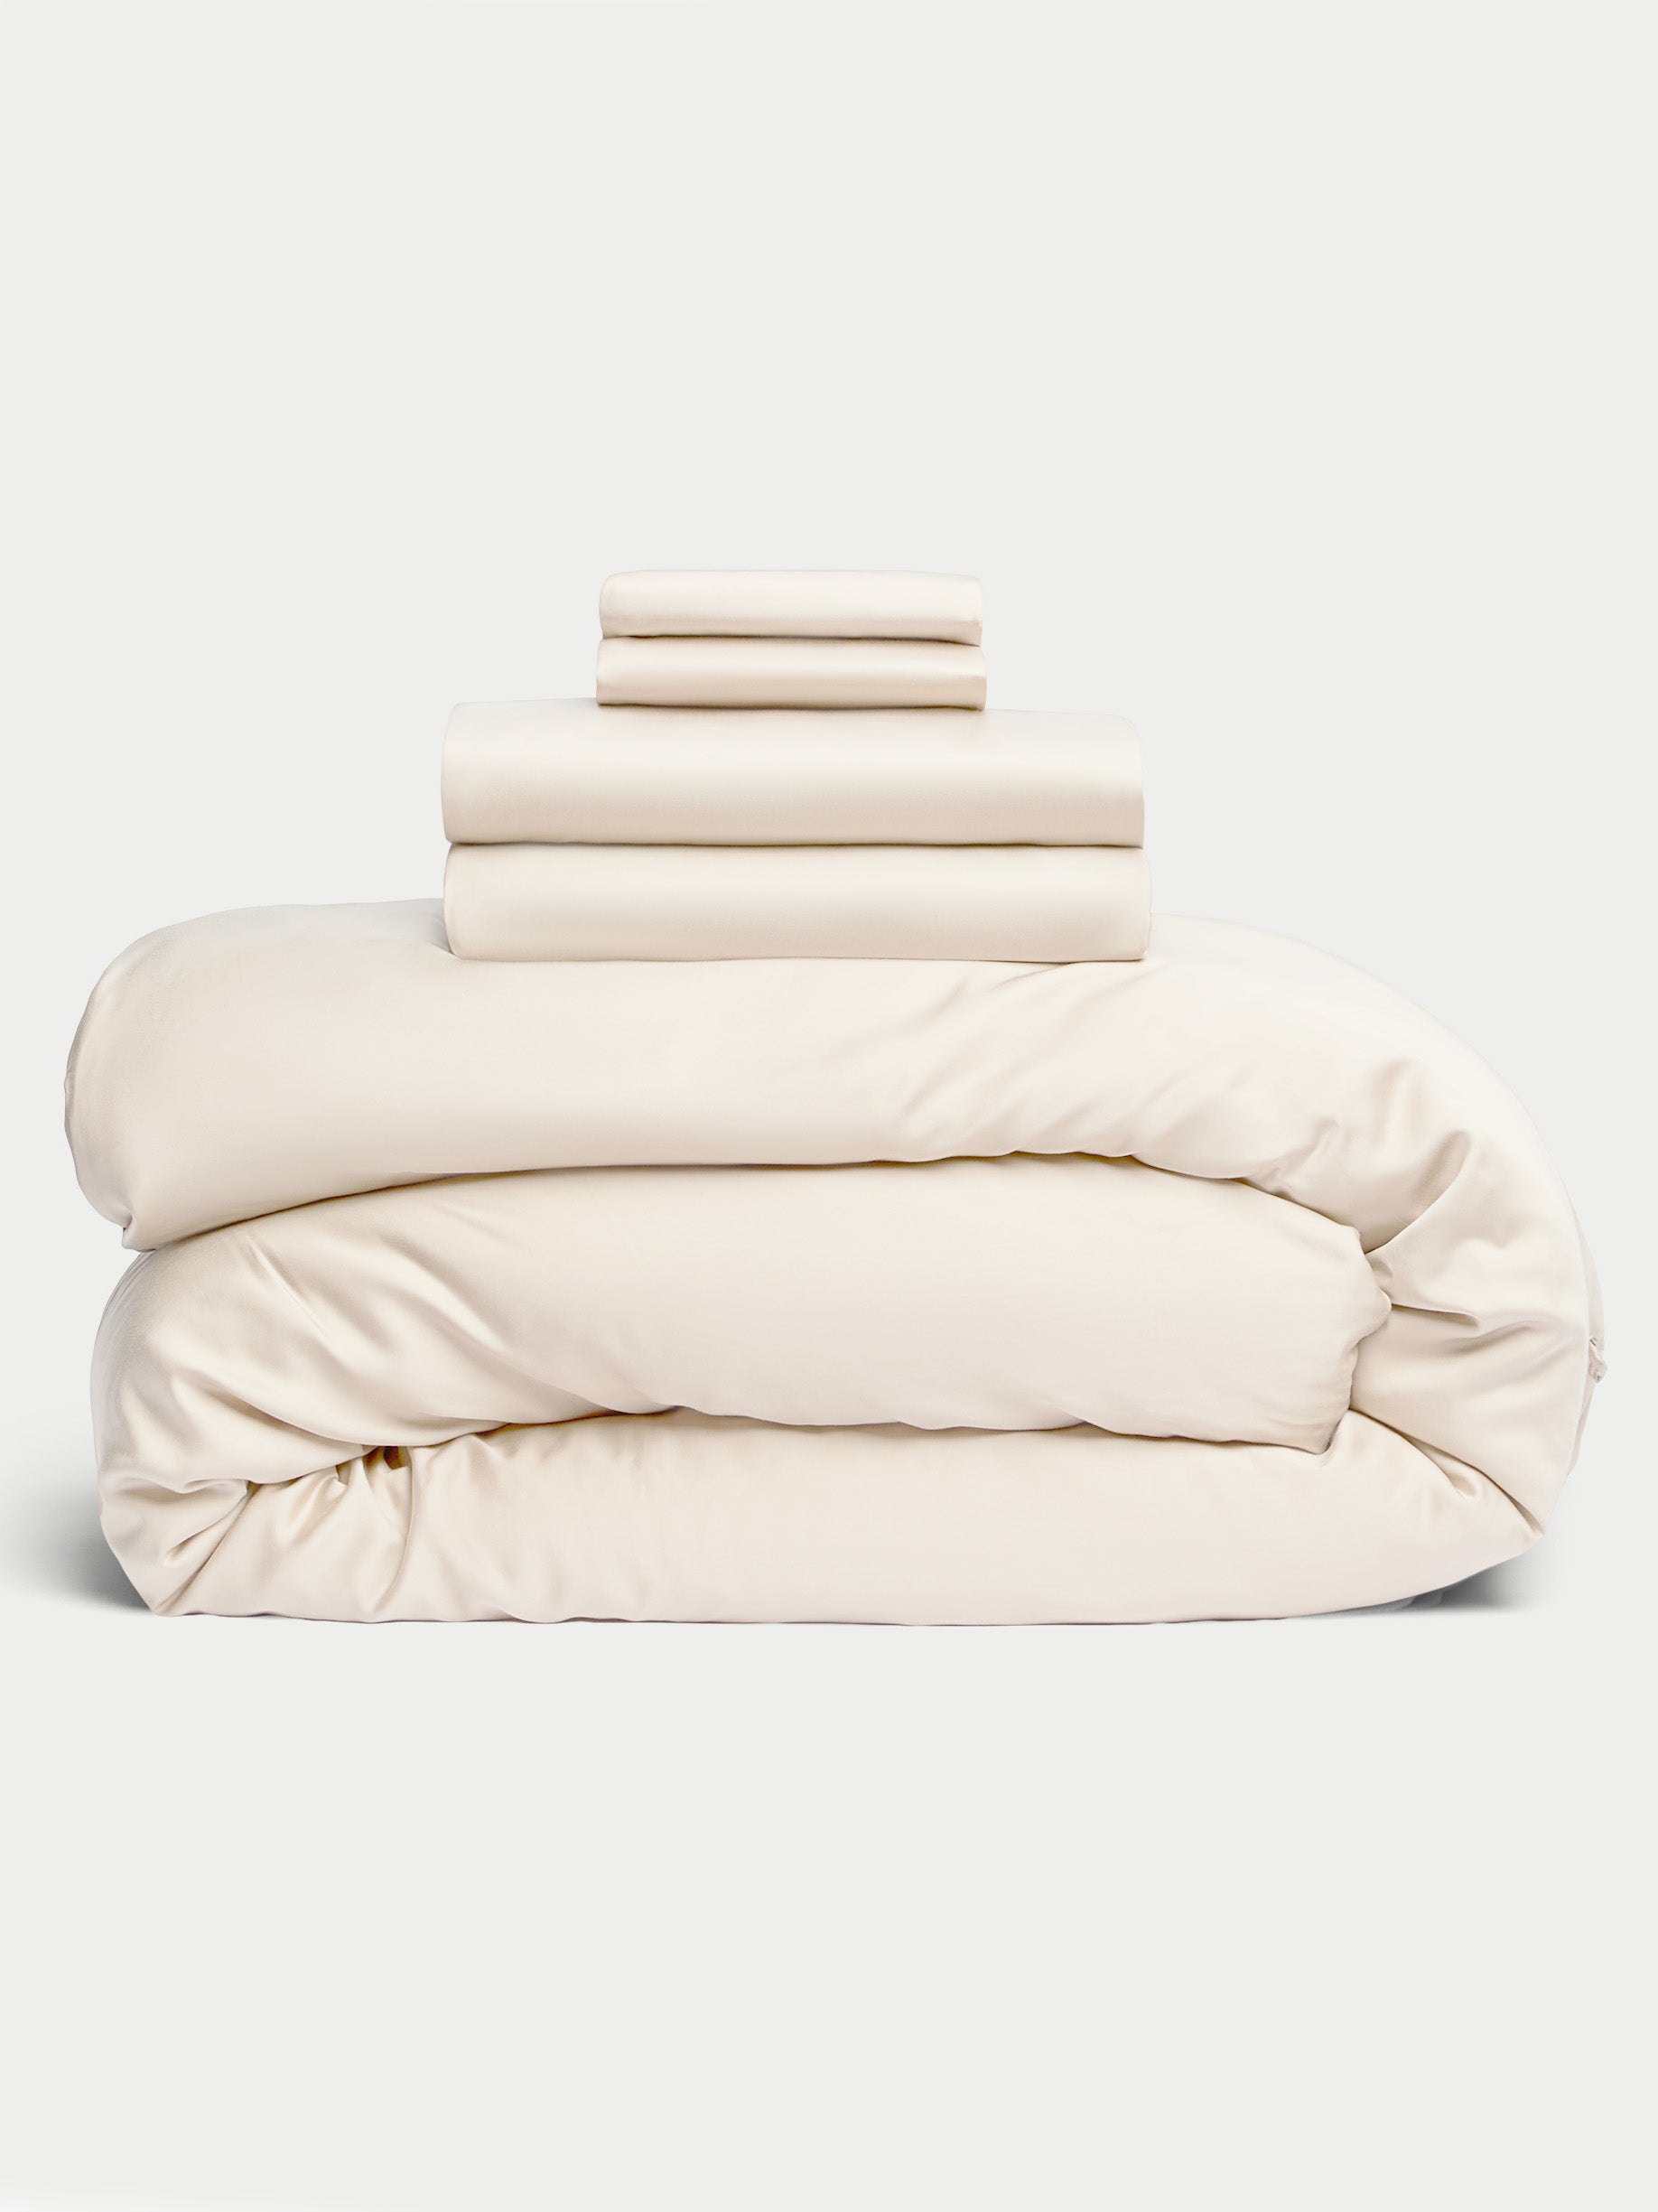 Oat bedding bundle stacked up with white background |Color:Oat